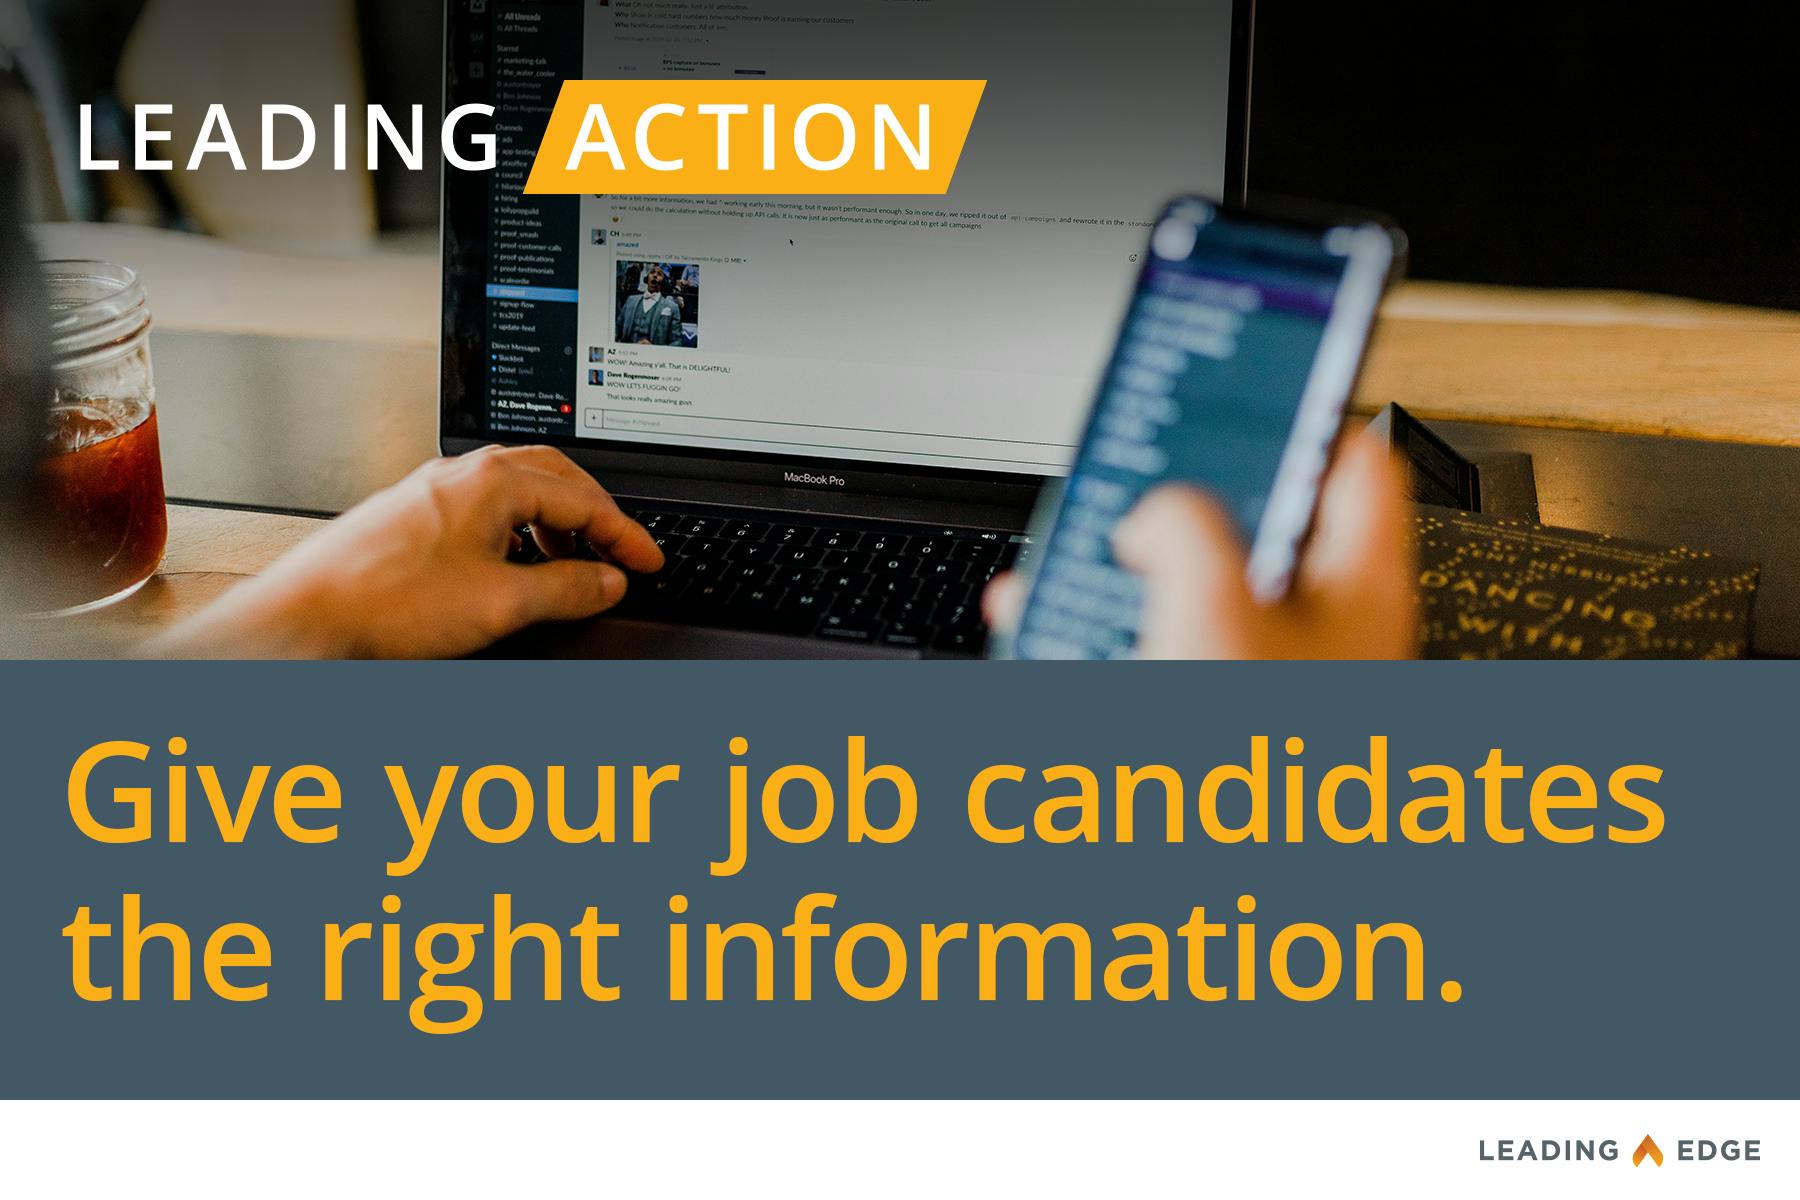 Leading Action: Give your job candidates the right information.